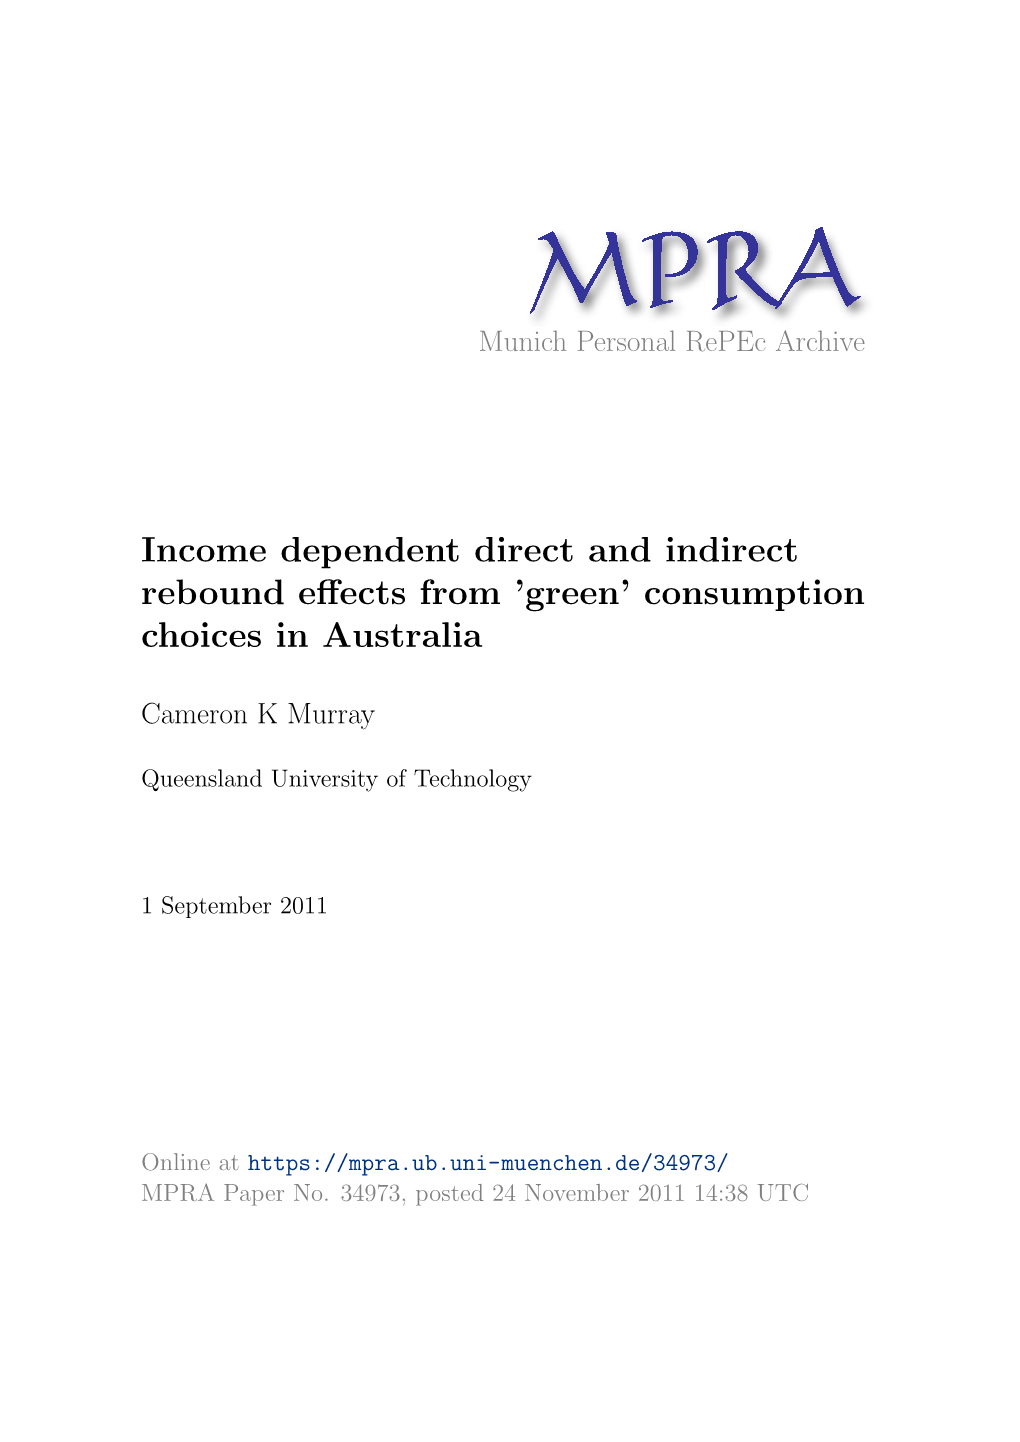 Income Dependent Direct and Indirect Rebound Effects from 'Green'